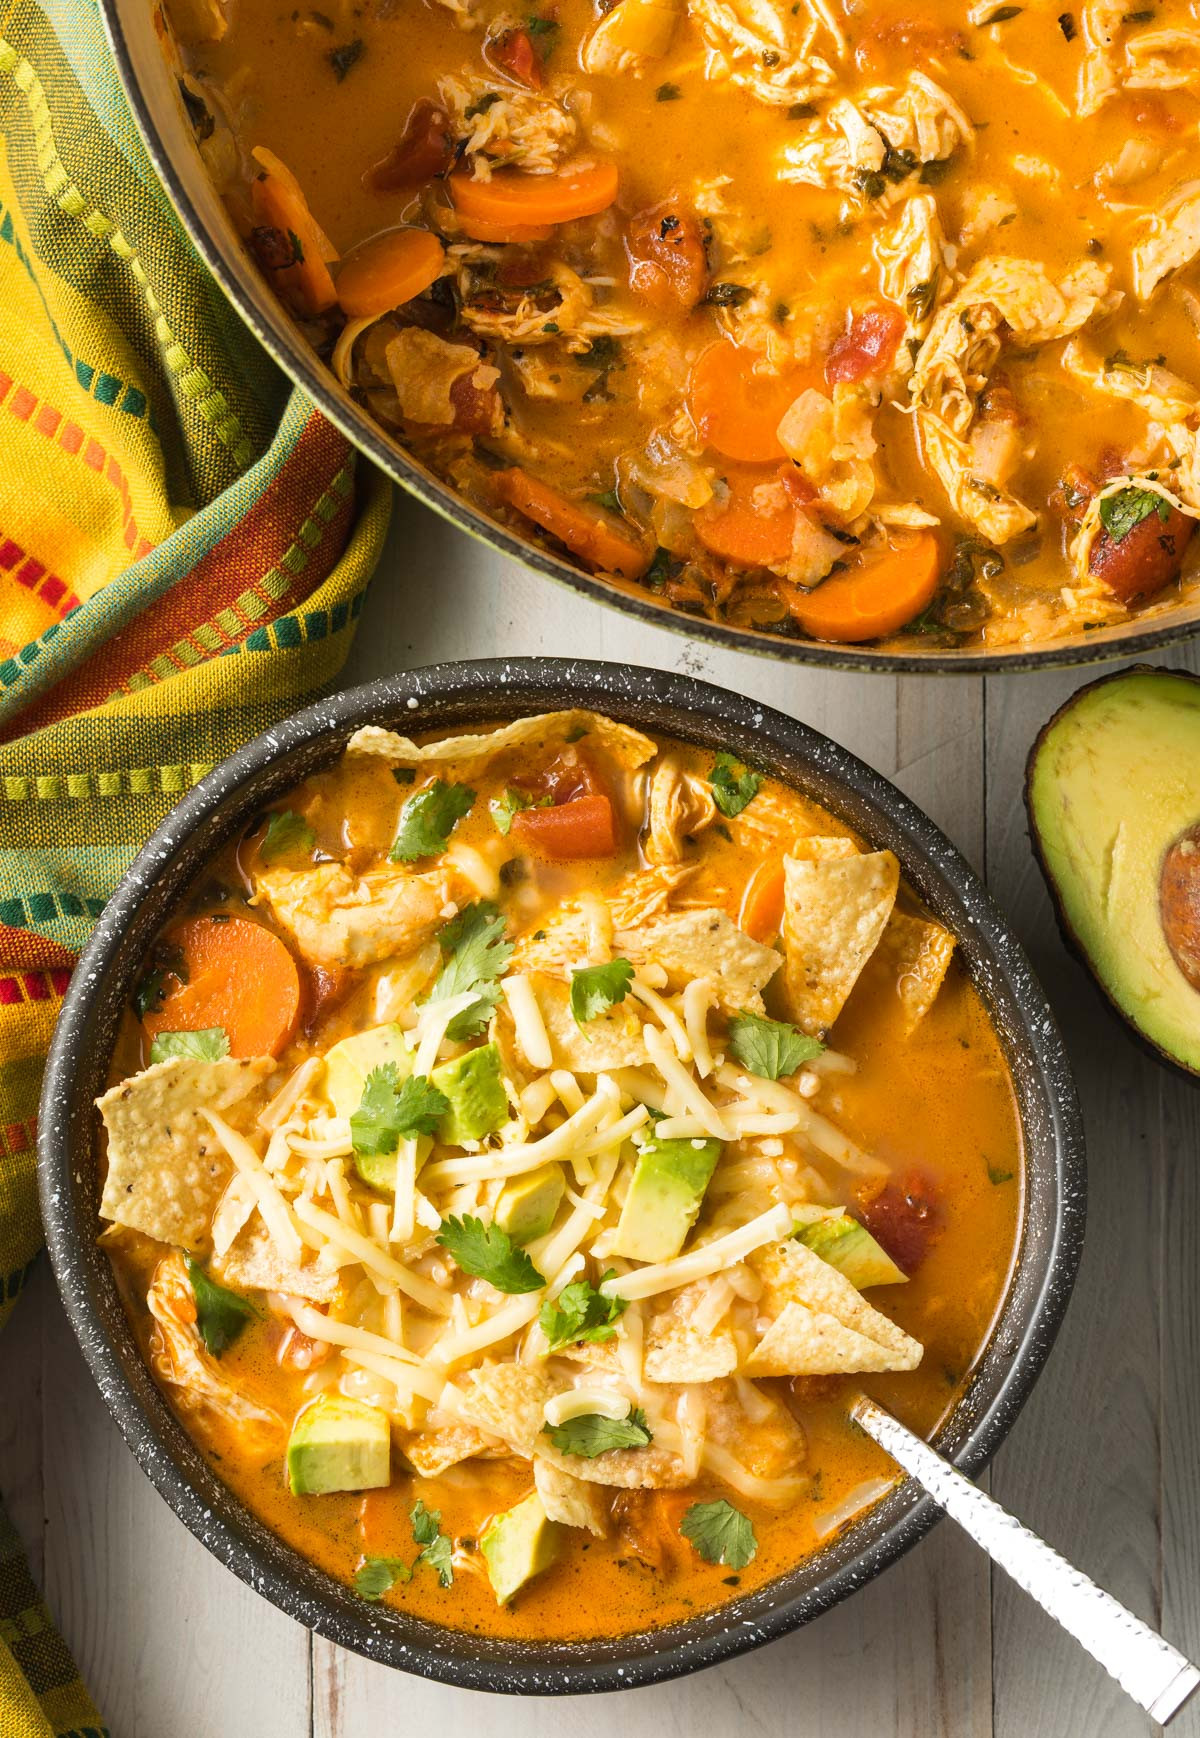 The 20 Best Ideas for Chili's Chicken tortilla soup - Best Recipes ...